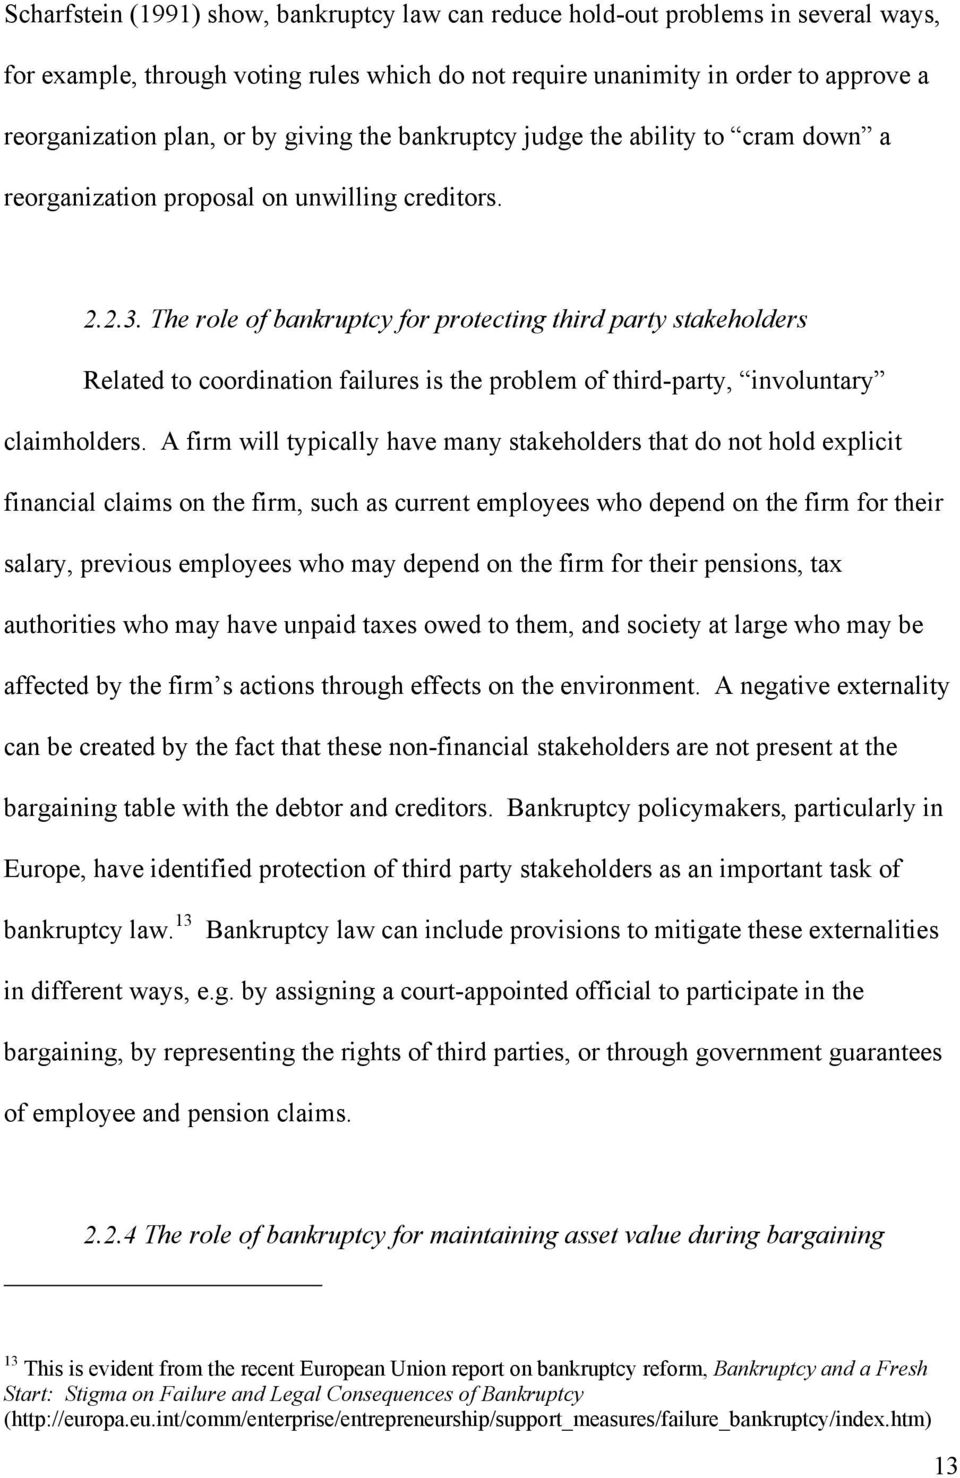 The role of bankruptcy for protecting third party stakeholders Related to coordination failures is the problem of third-party, involuntary claimholders.